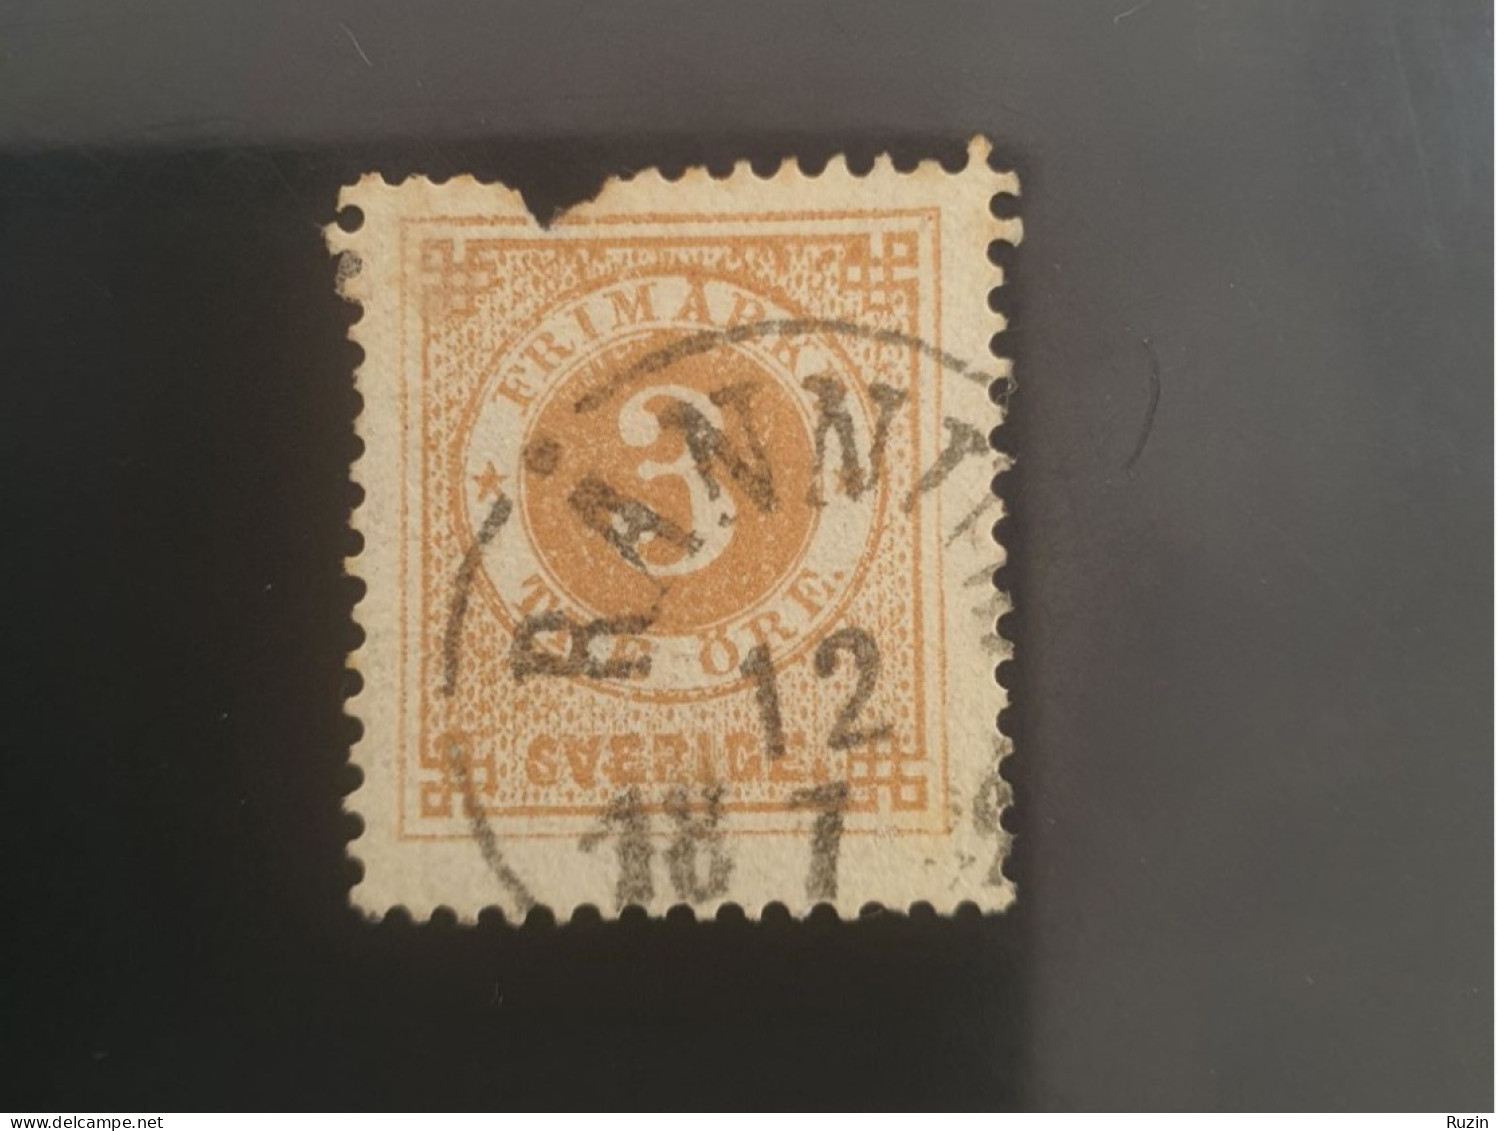 Sweden 1886 Circle Type Stamp 3 öre Yellow Brown - Used Stamps